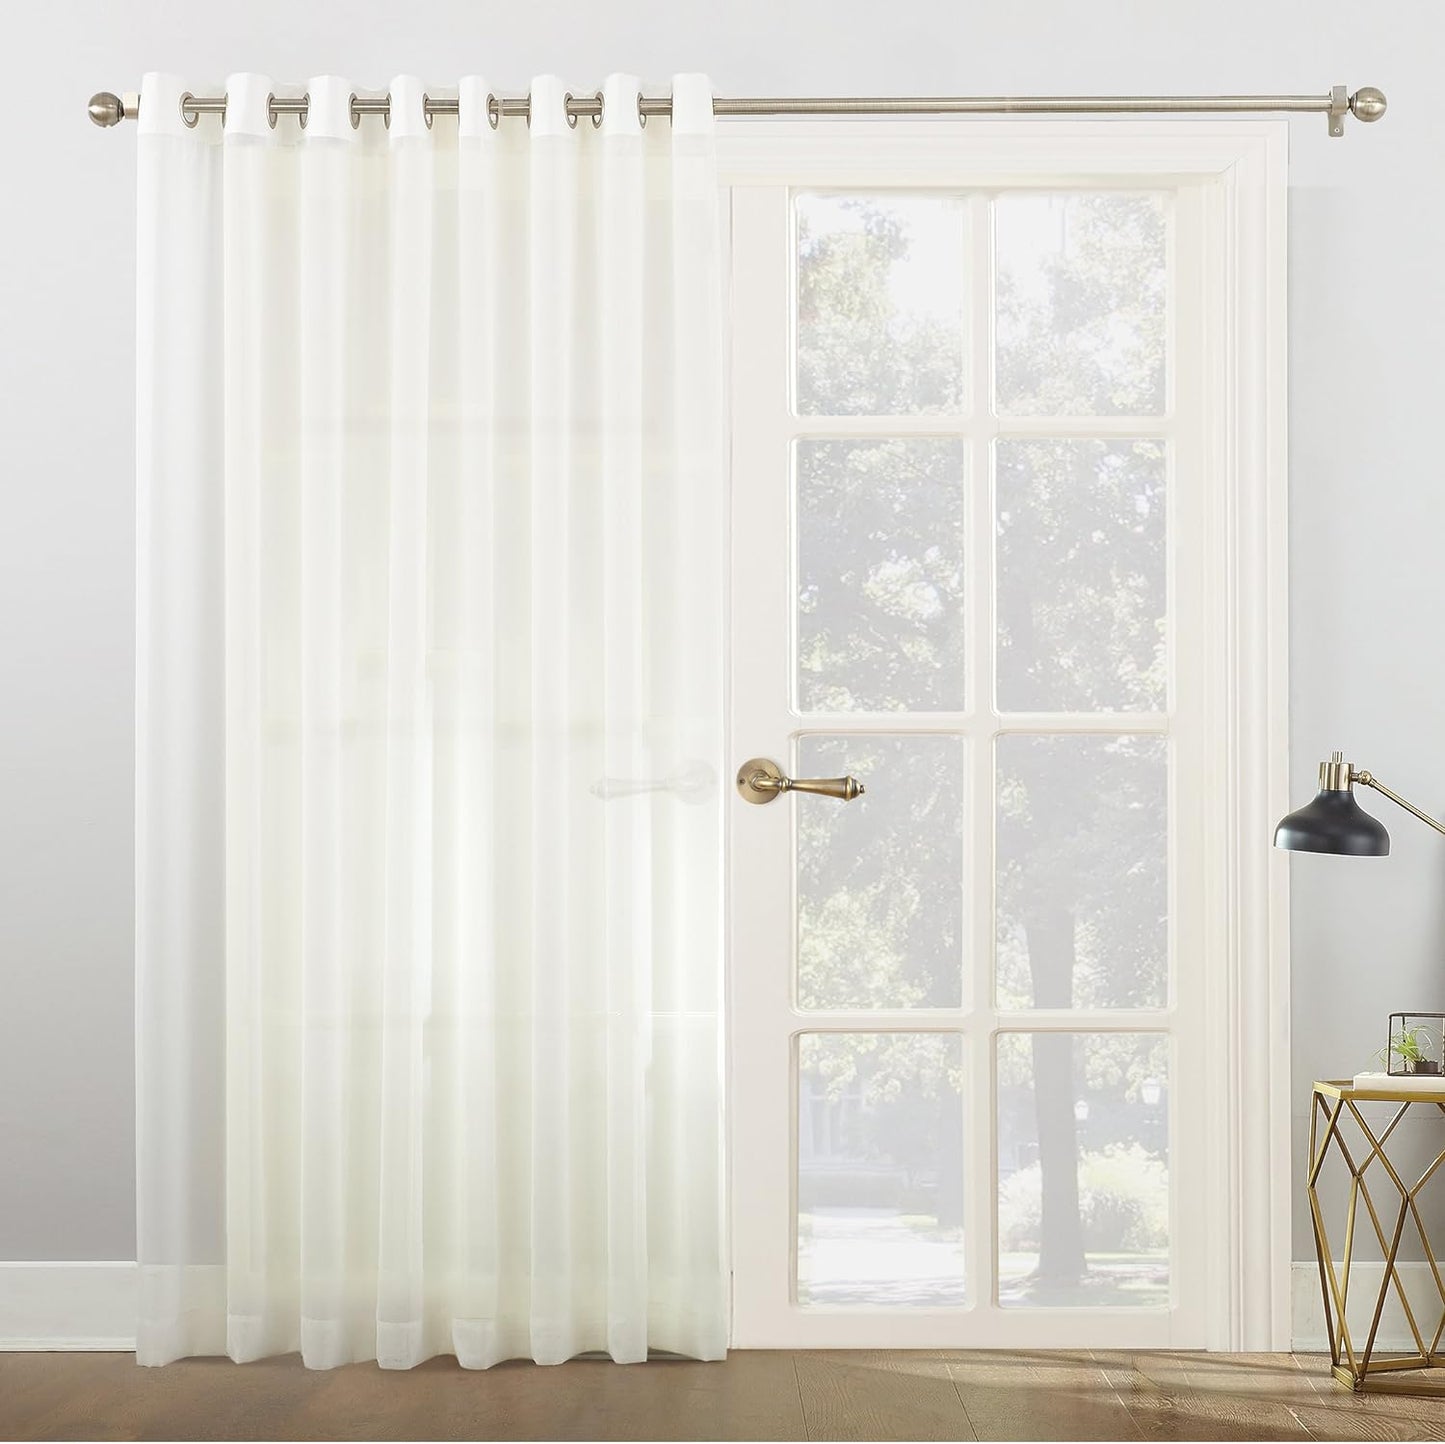 No. 918 Emily Sheer Voile Grommet Curtain Panel, 59" X 95", White  No. 918 Ivory Sliding Patio Door Curtain Panel 100" X 84"